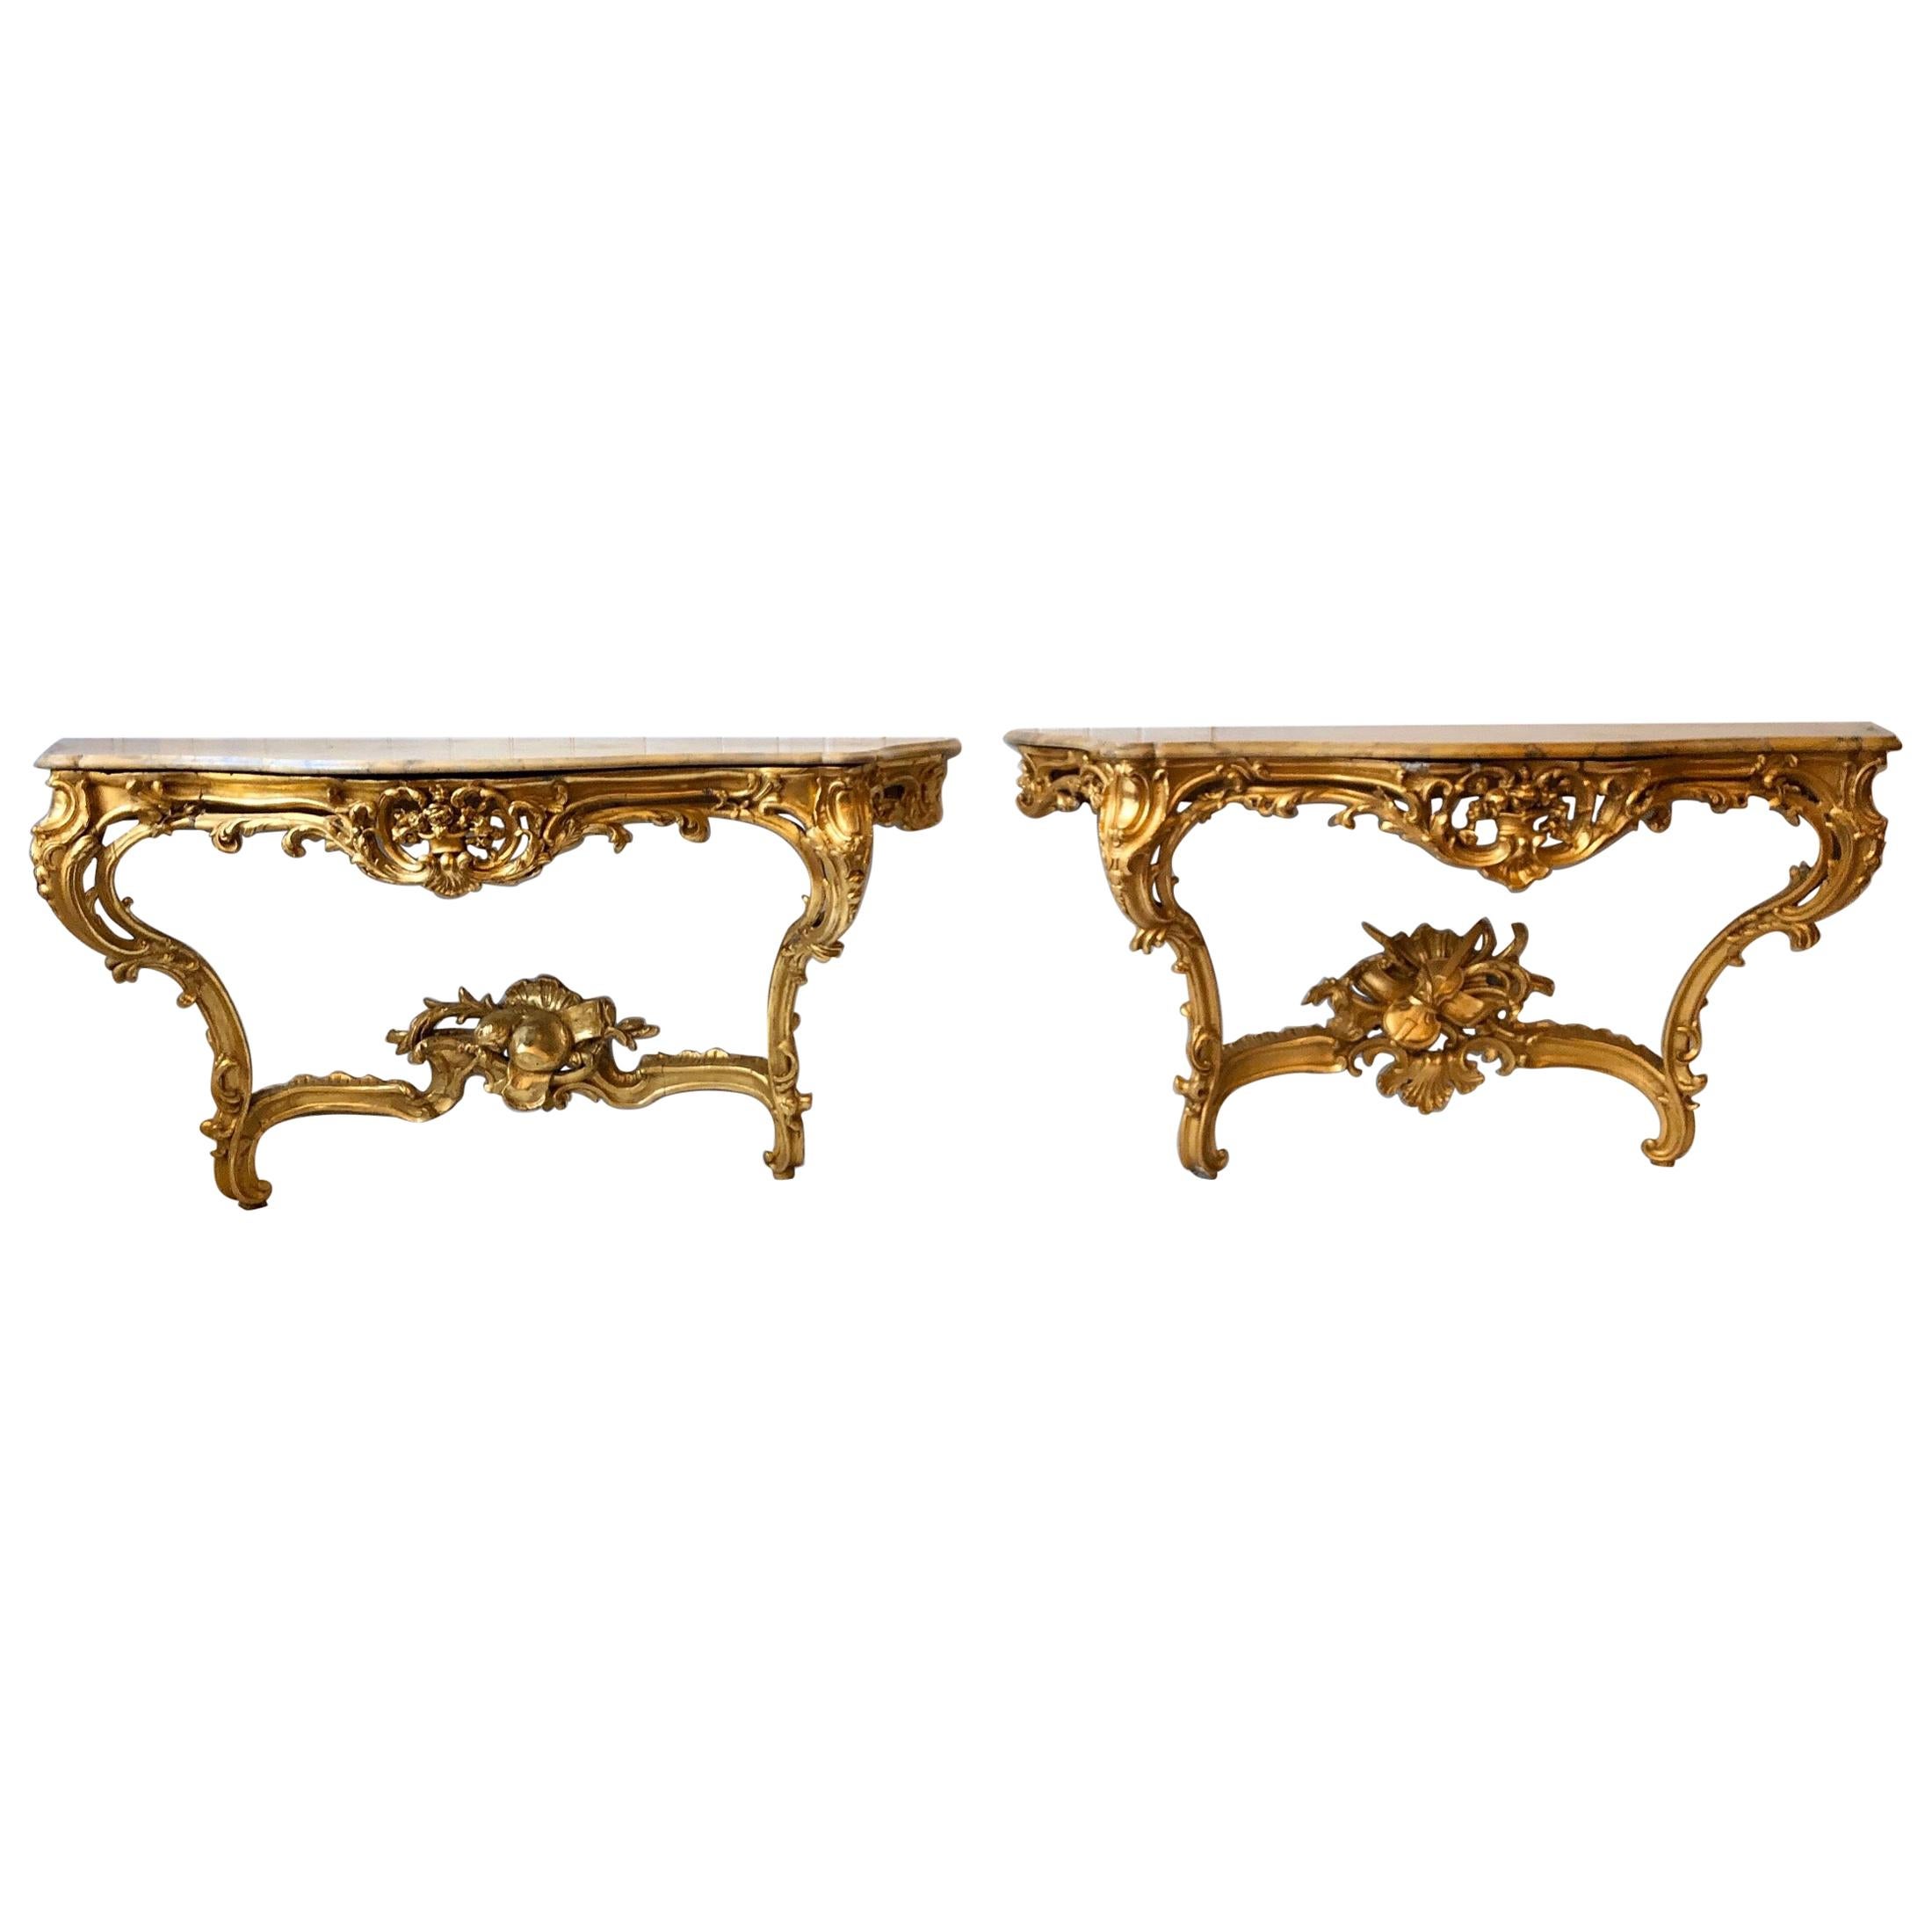 Pair of Georgian Irish Giltwood Consoles with Scagliola Marble Tops